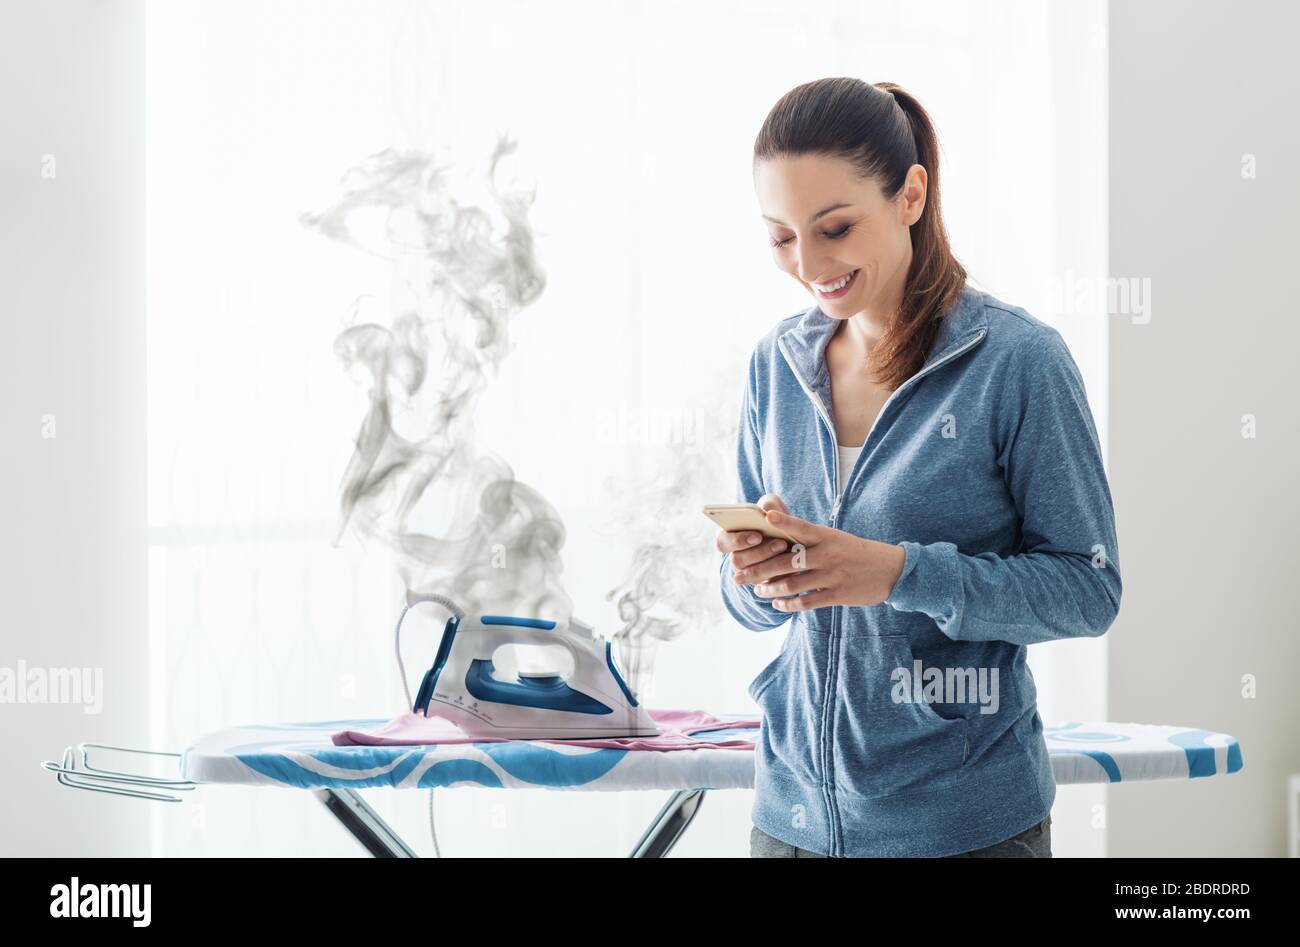 Careless smiling housewife at home texting with her smartphone, she has left the iron on the ironing board Stock Photo